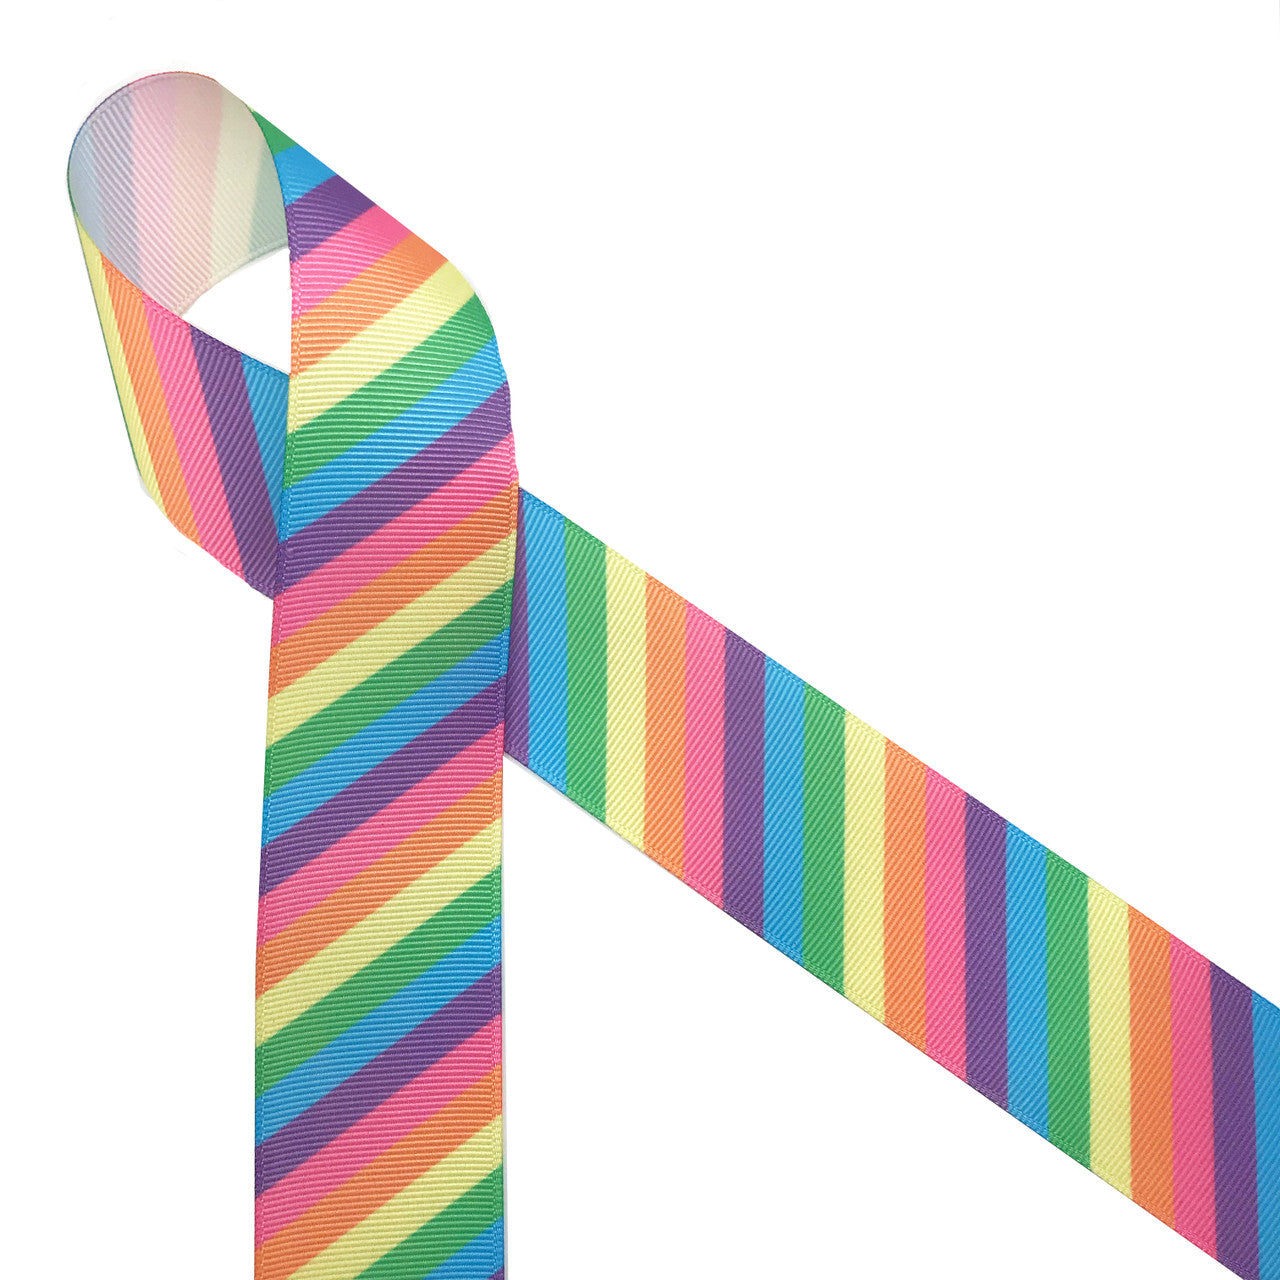 Pastel  stripes in pink, yellow, blue, purple and  green printed on 1.5" white grosgrain ribbon is such a fun ribbon for hair bows, hat bands, fascinators, crafts and sewing projects! Be sure to have this ribbon on hand for all your new colorful and creative ideas.